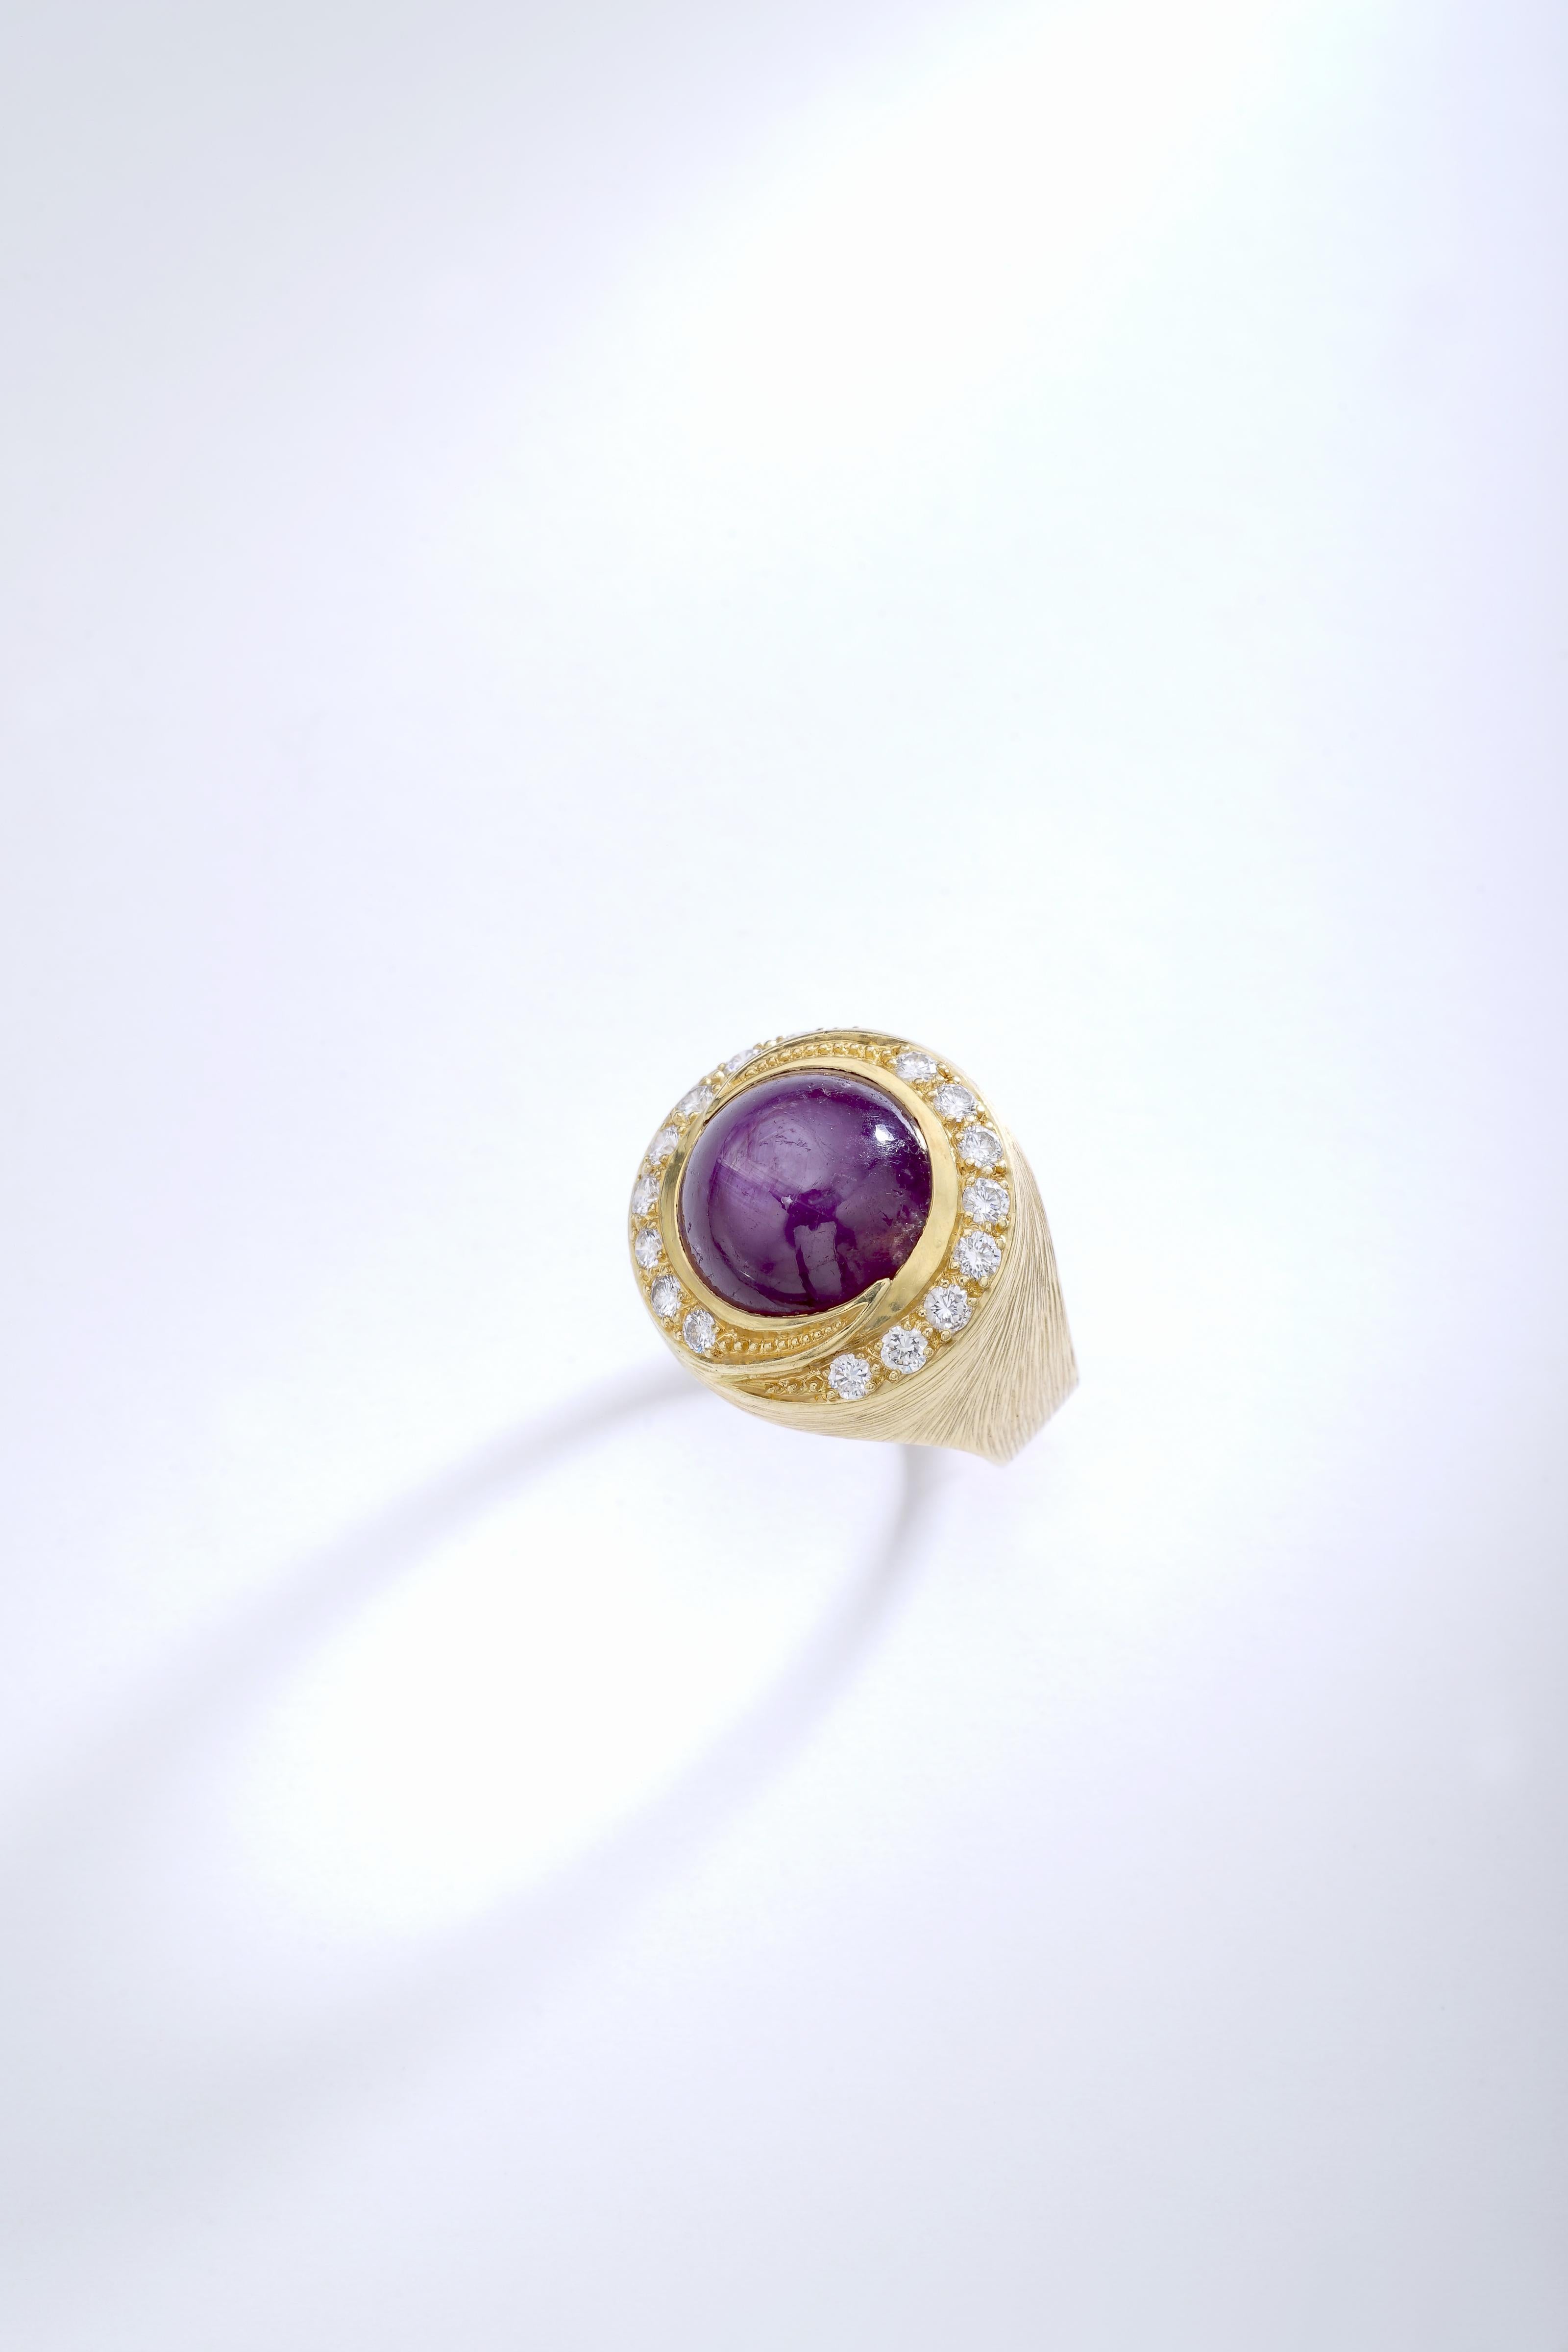 A Star Ruby Cabochon surrounded by Diamond on engraved yellow gold.
Circa 1980.

Gross weight: 11.93 grams.